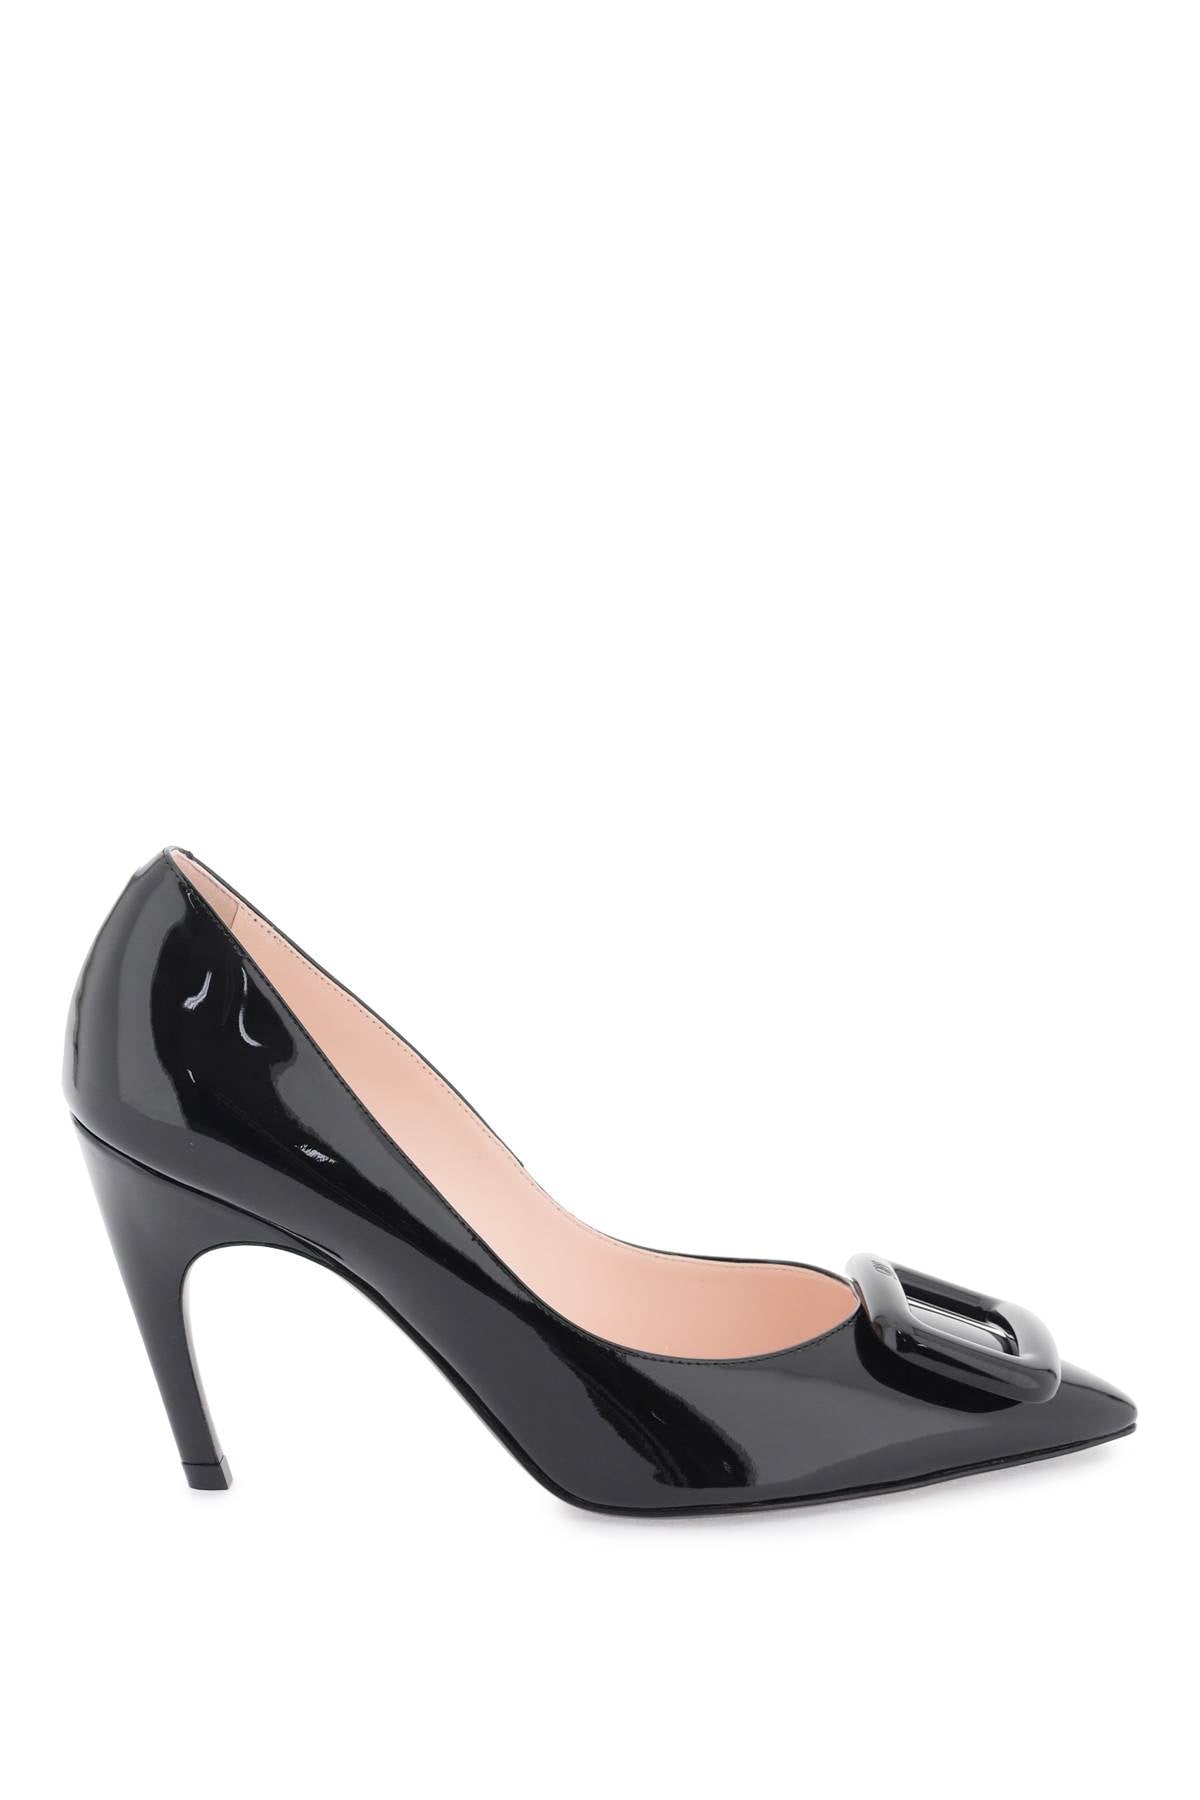 ROGER VIVIER Classic Black Patent Leather Pumps for Women - Timeless Style for FW23